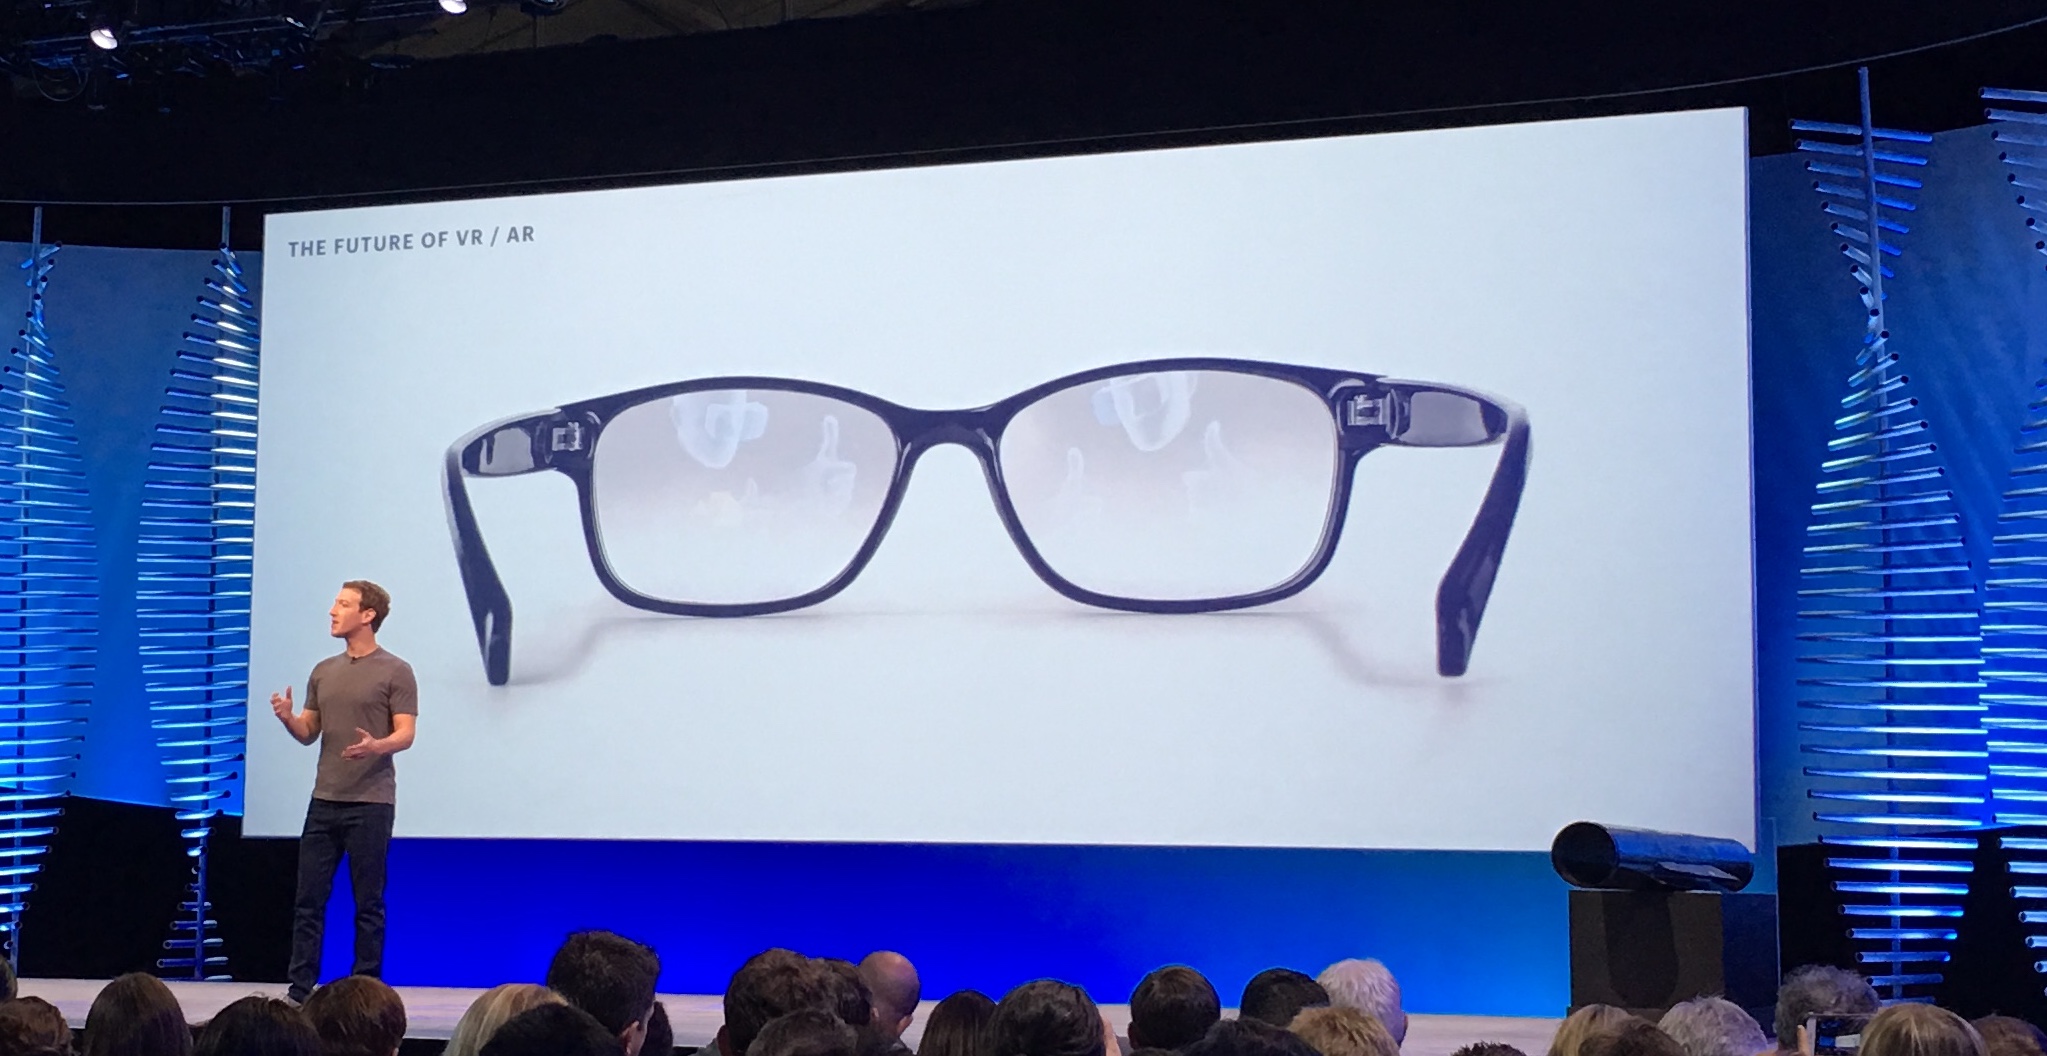 Facebook says VR headsets will look like Ray-Bans in 10 years